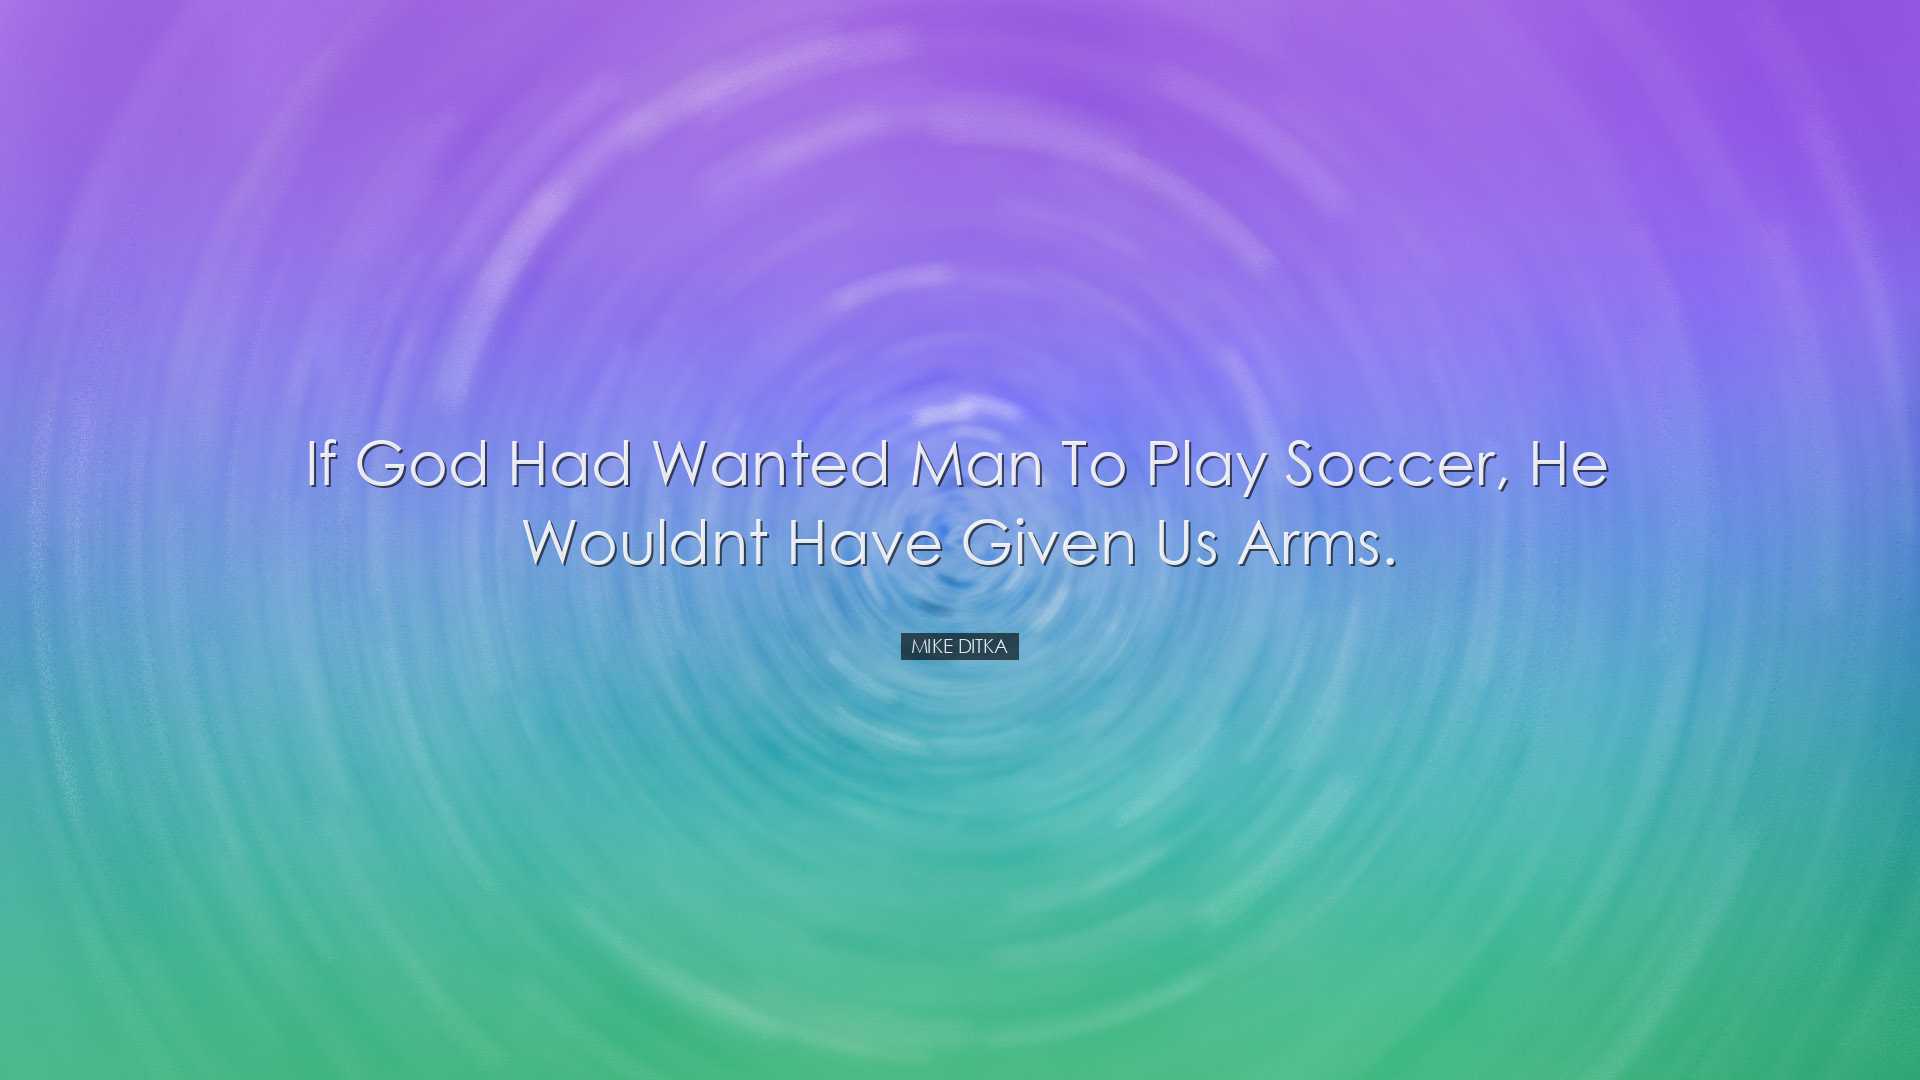 If God had wanted man to play soccer, he wouldnt have given us arm